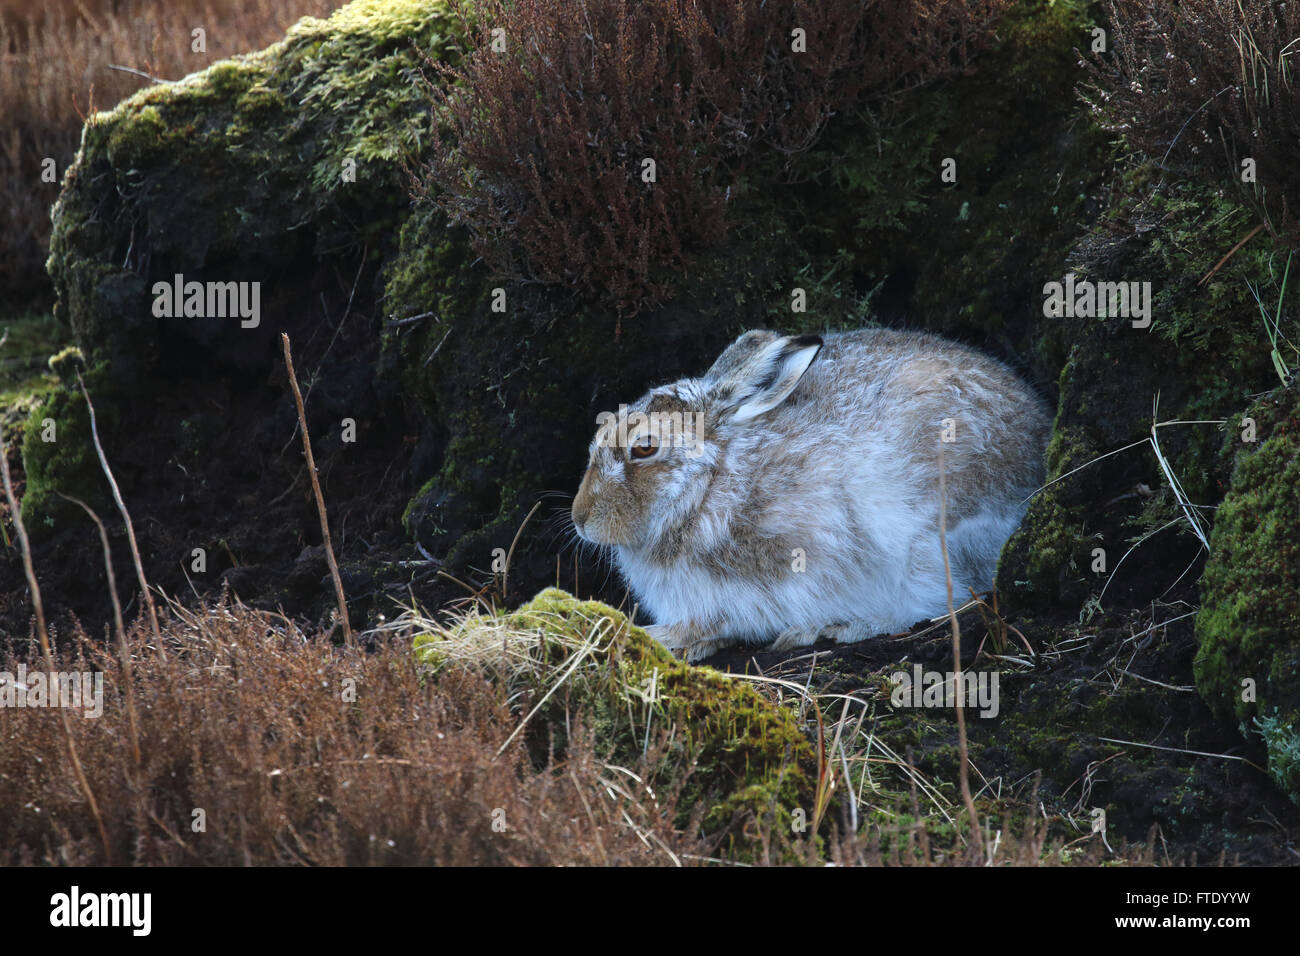 Mountain Hare lepus timidus hiding under undercut peat on moorland in the process of moulting it white winter coat Stock Photo